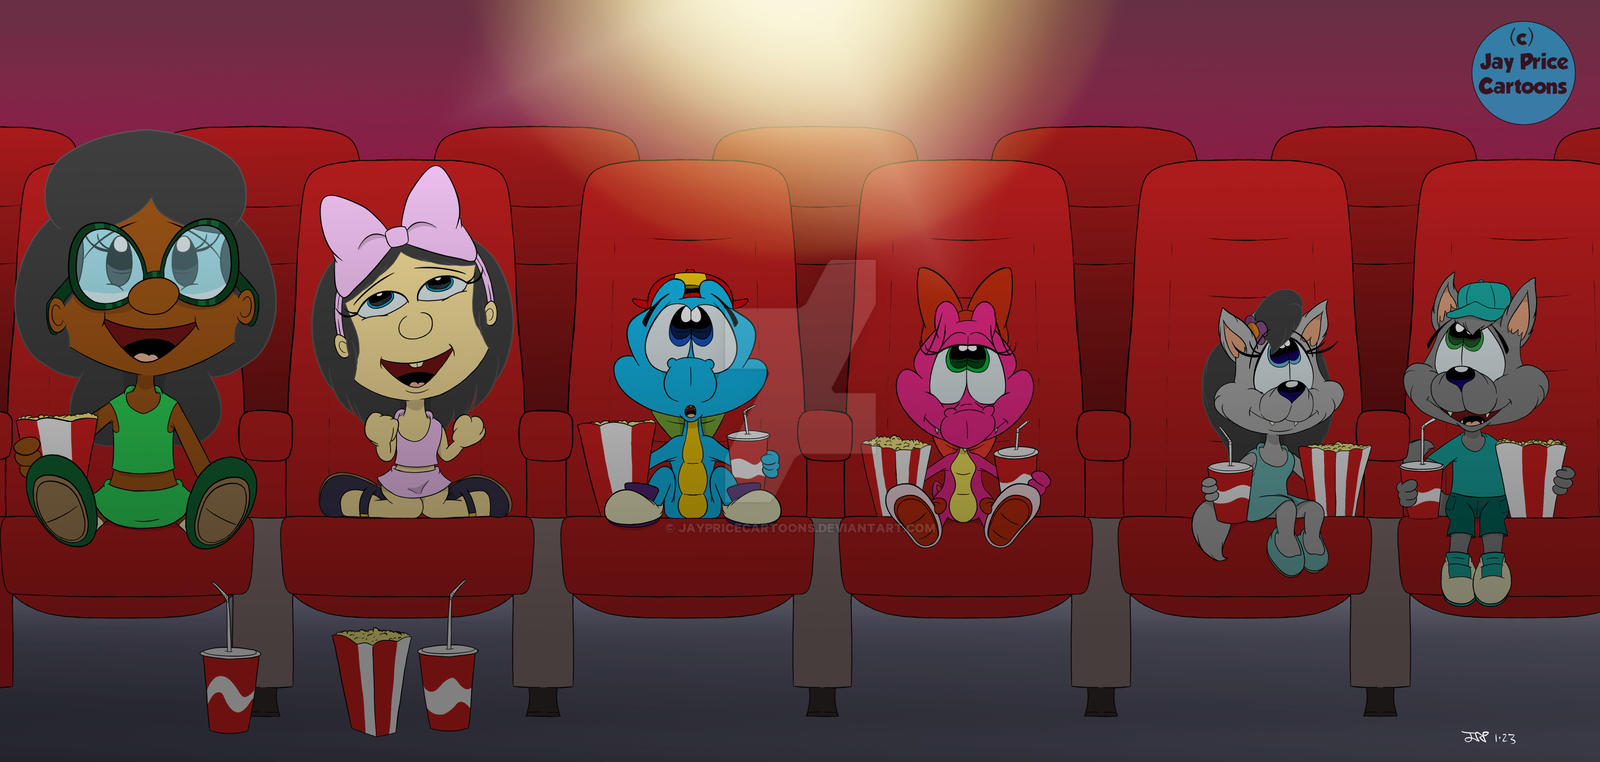 Friends At the Movies by JayPriceCartoons on DeviantArt